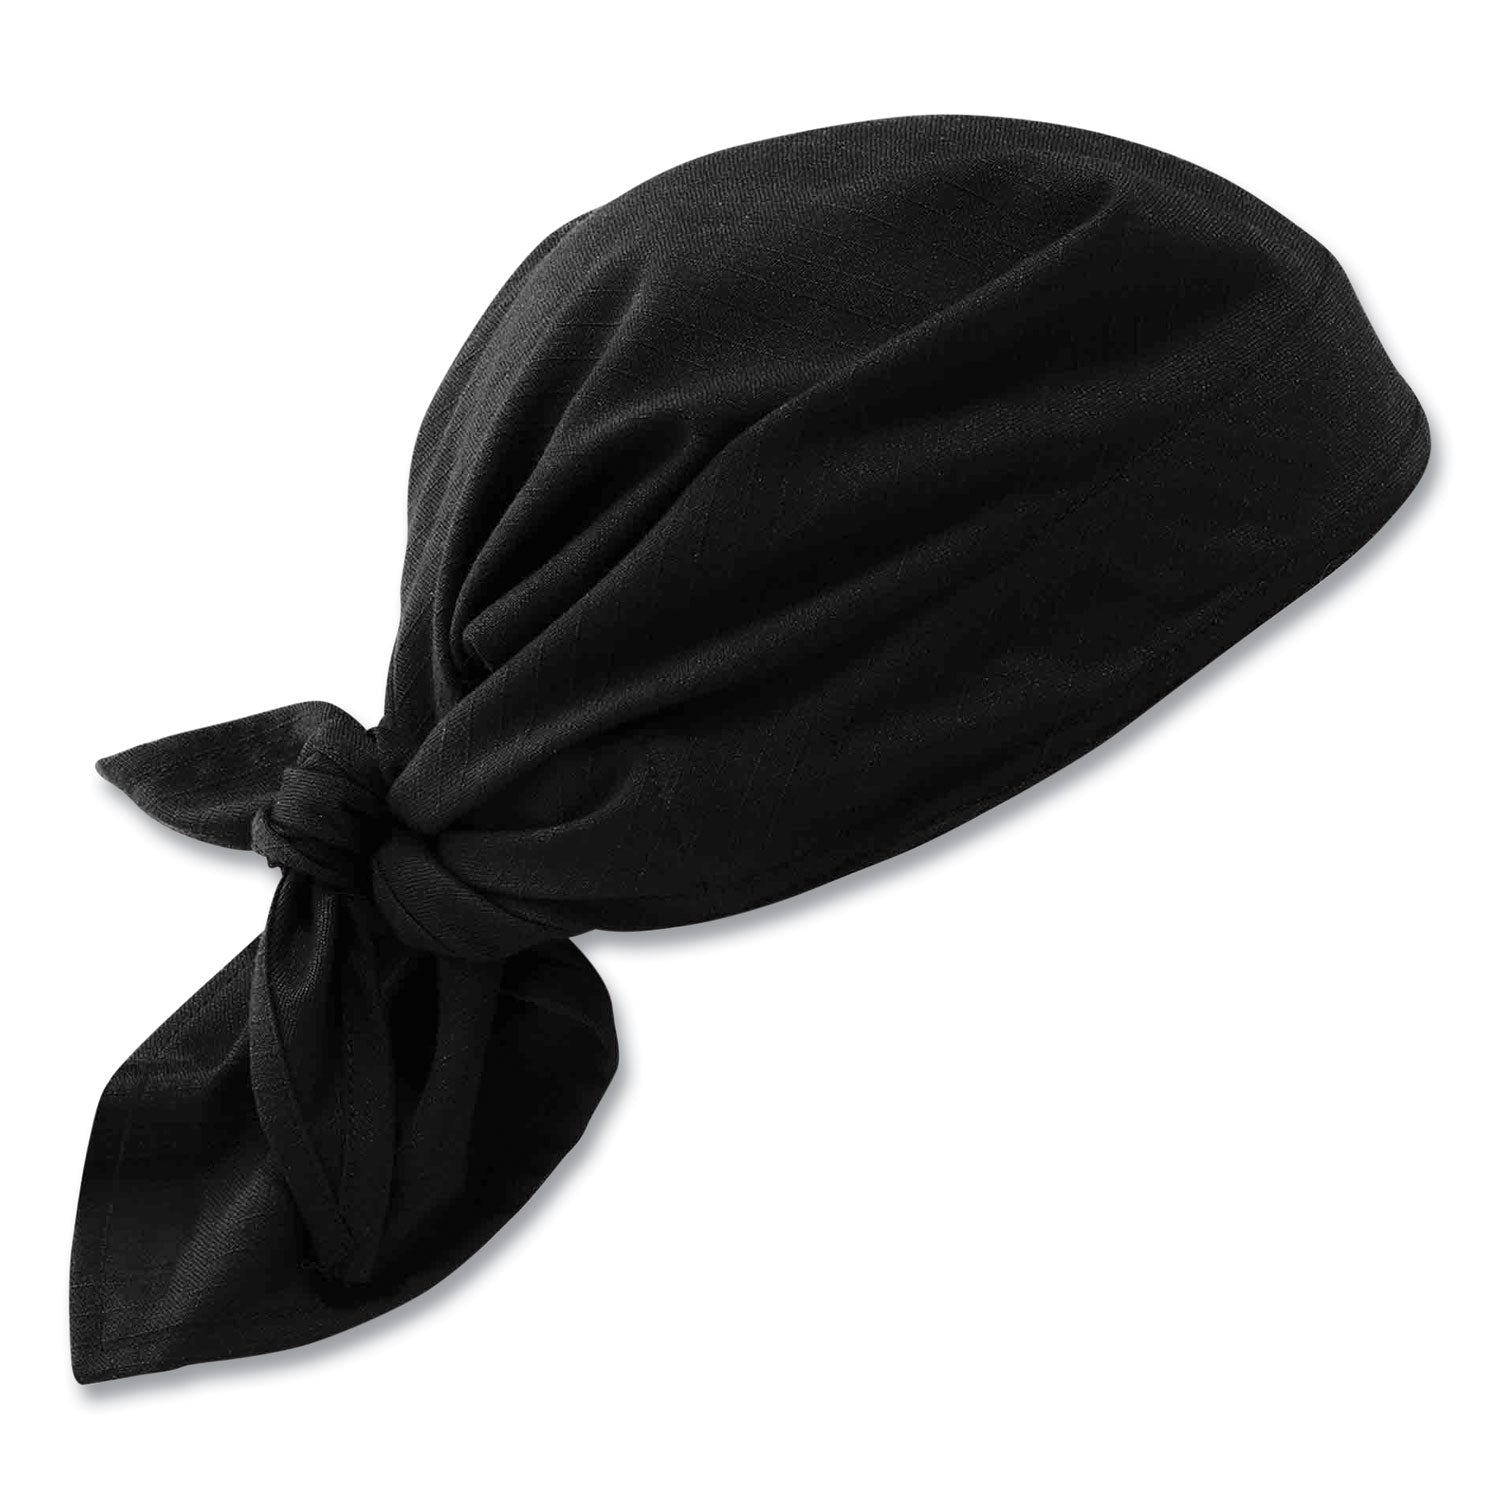 chill-its-6710ct-cooling-pva-tie-bandana-triangle-hat-one-size-fits-most-black-ships-in-1-3-business-days_ego12585 - 1